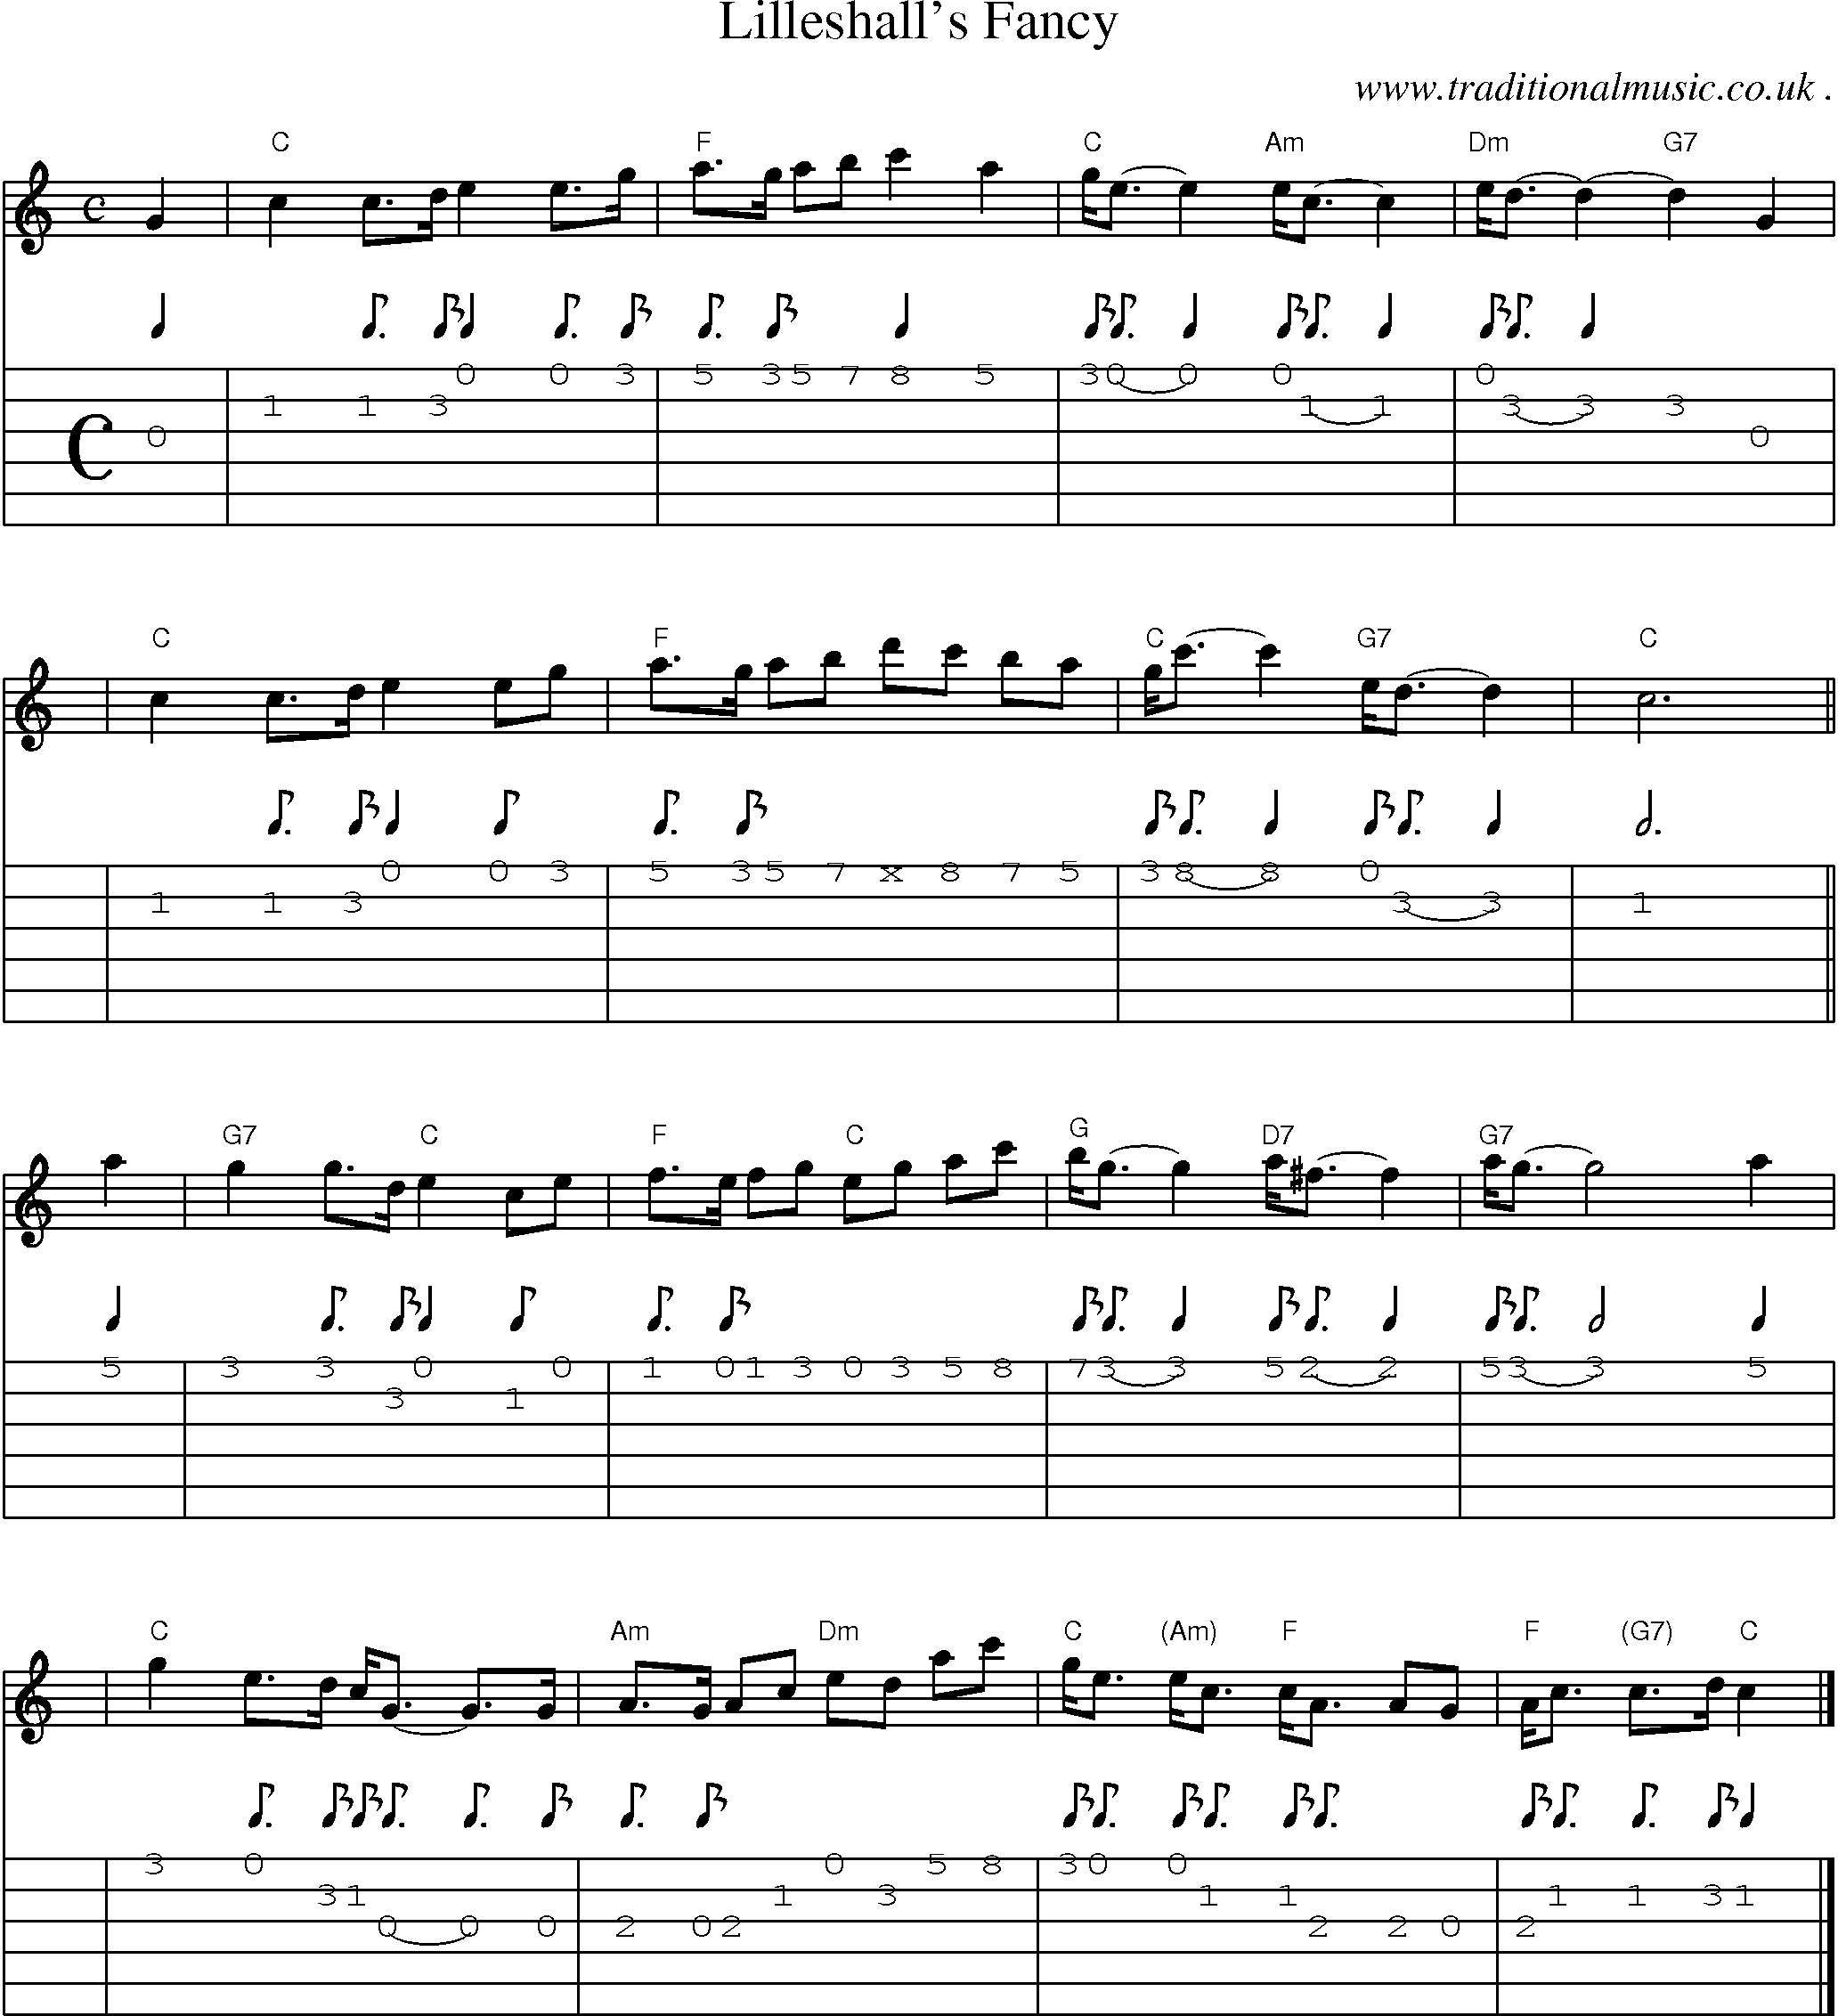 Sheet-music  score, Chords and Guitar Tabs for Lilleshalls Fancy